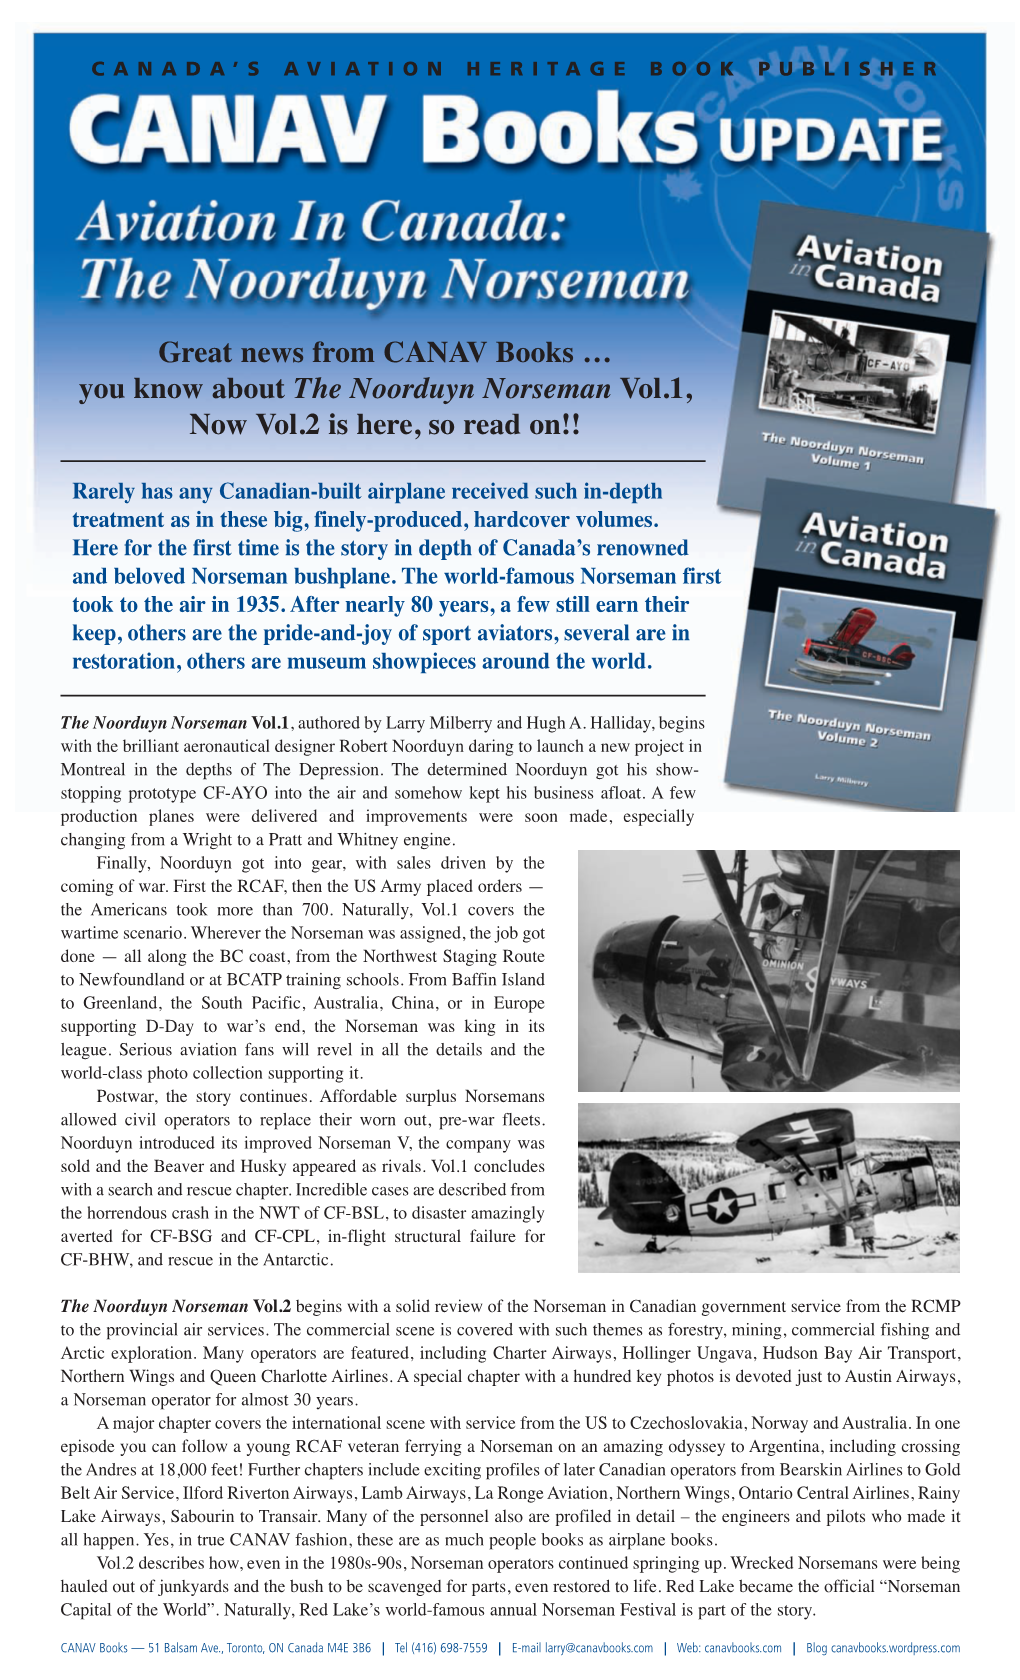 You Know About the Noorduyn Norseman Vol.1, Now Vol.2 Is Here, So Read On!!